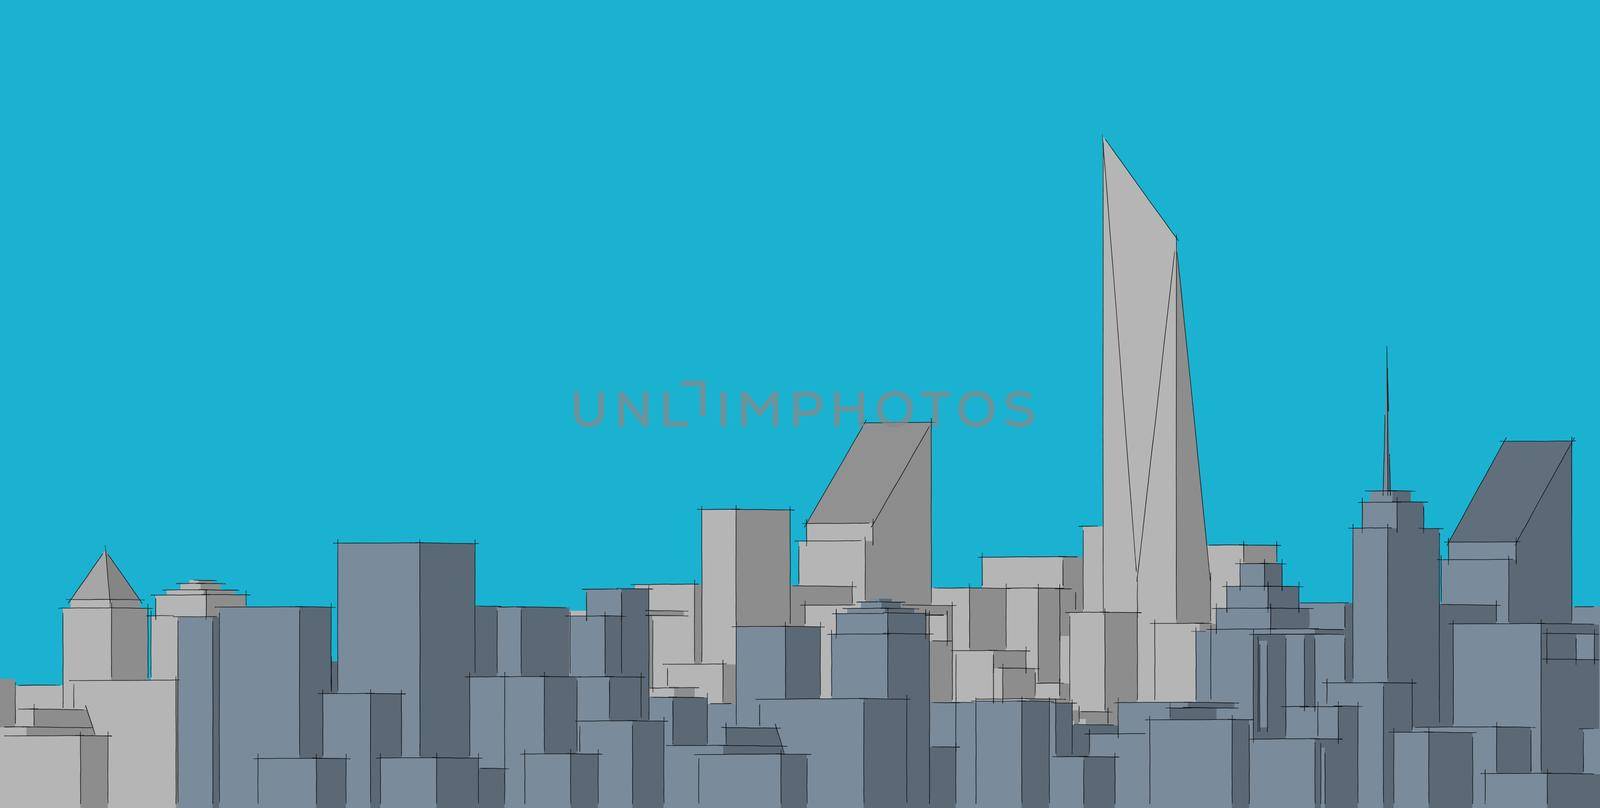 Abstract architectral drawing sketch,city, panorama, 3d illustration by bnmk0819